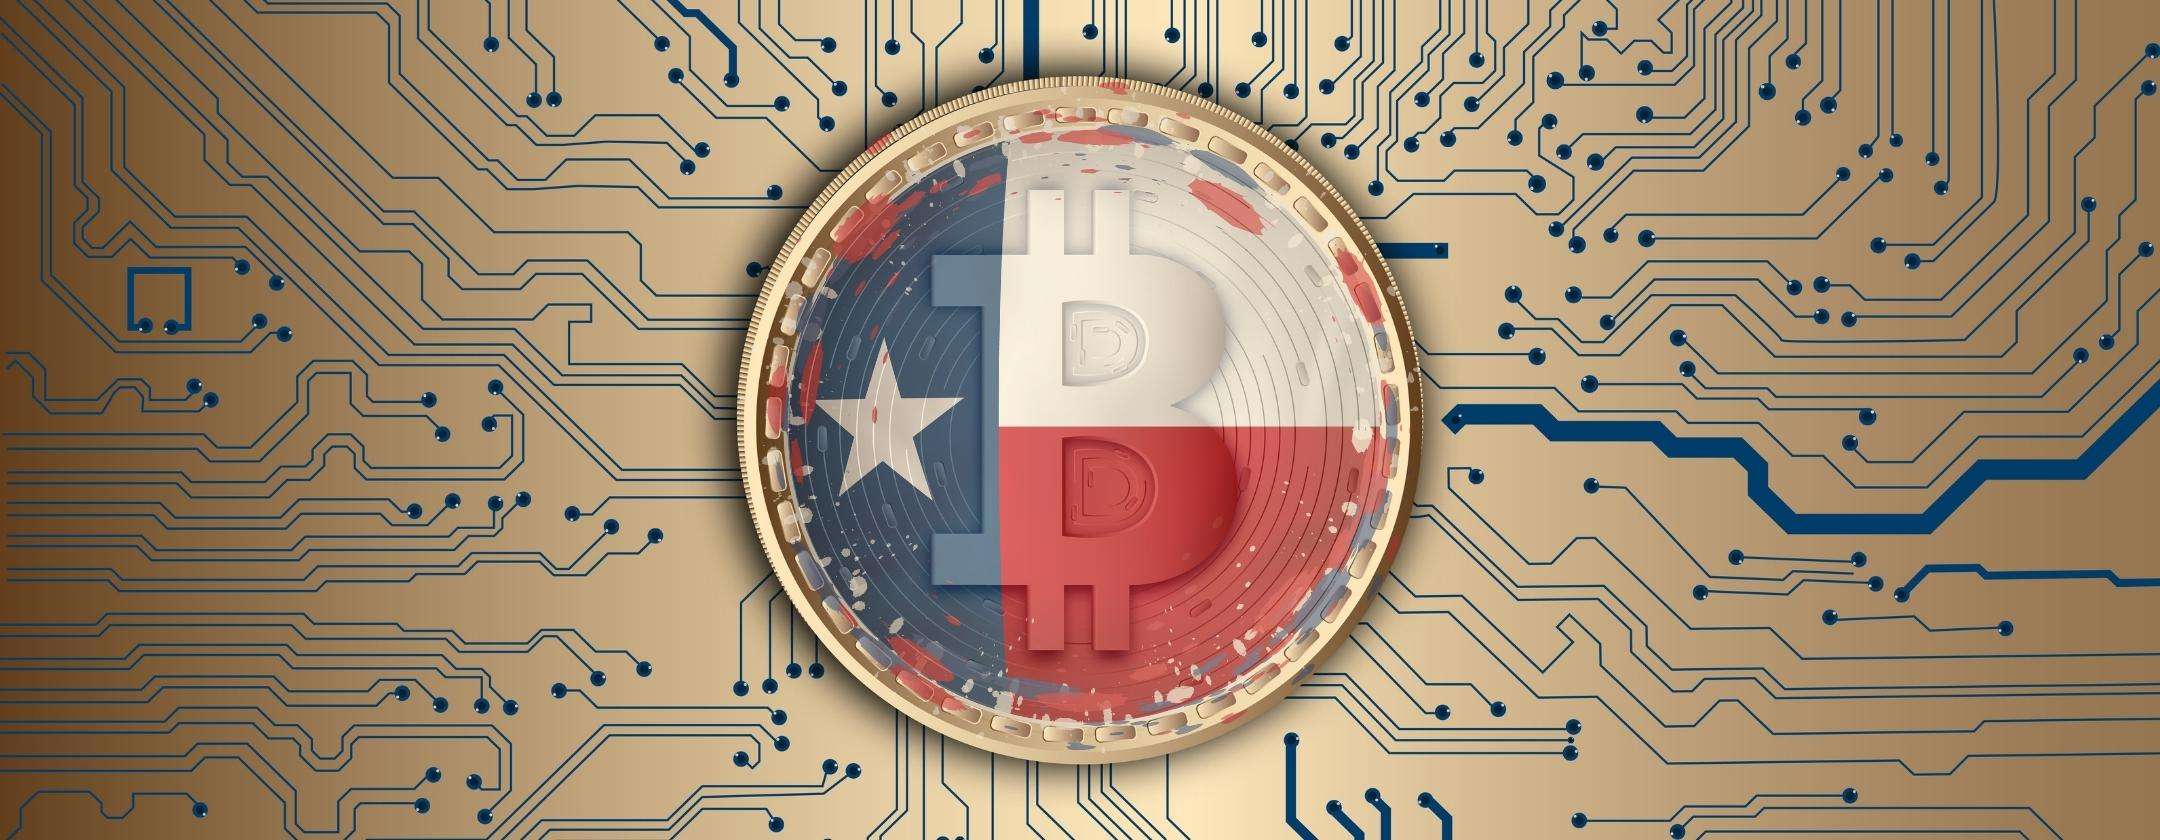 leading city in cryptocurrency austin